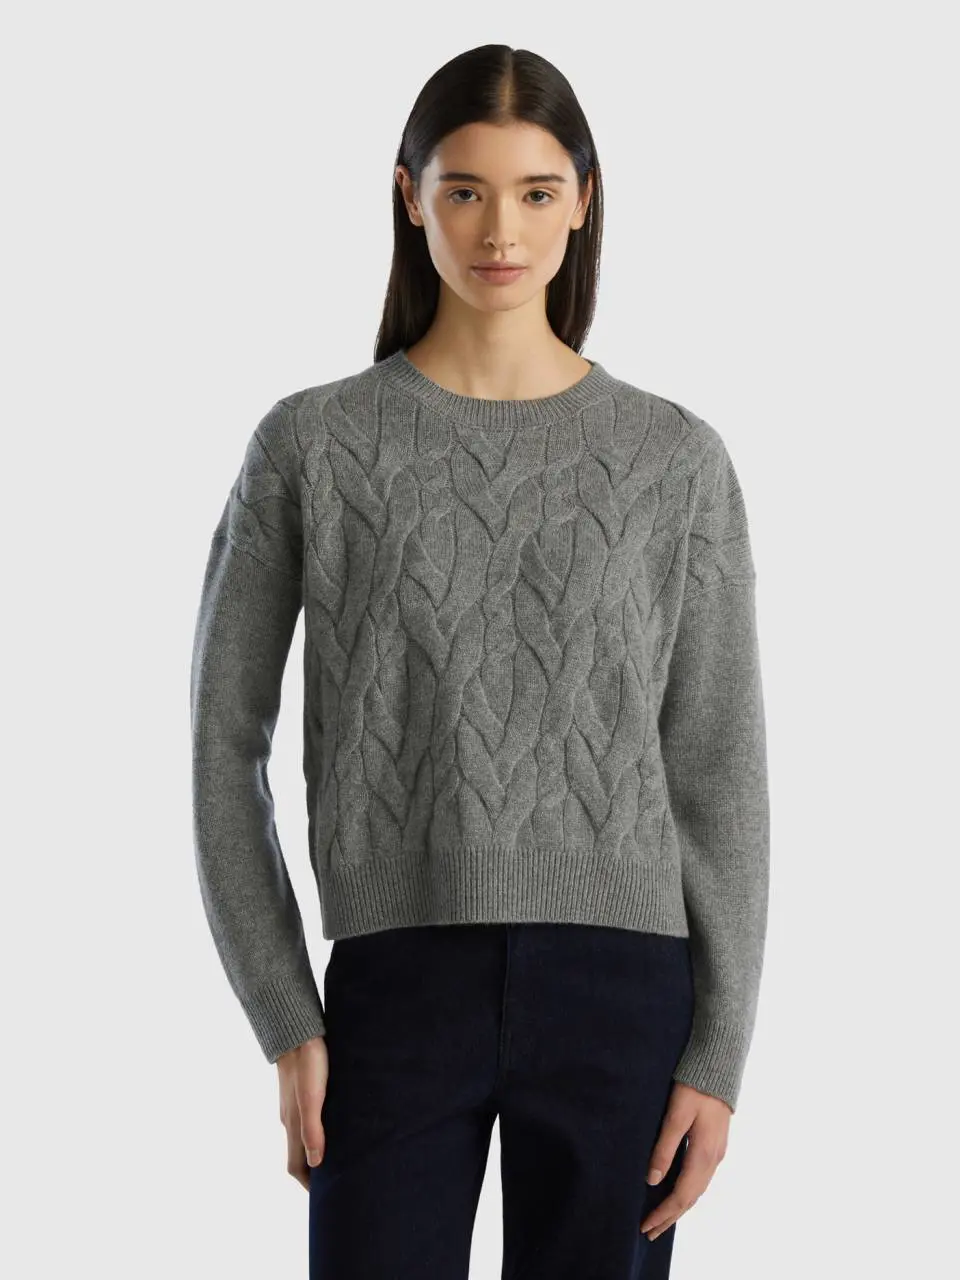 Benetton knit sweater in pure cashmere. 1